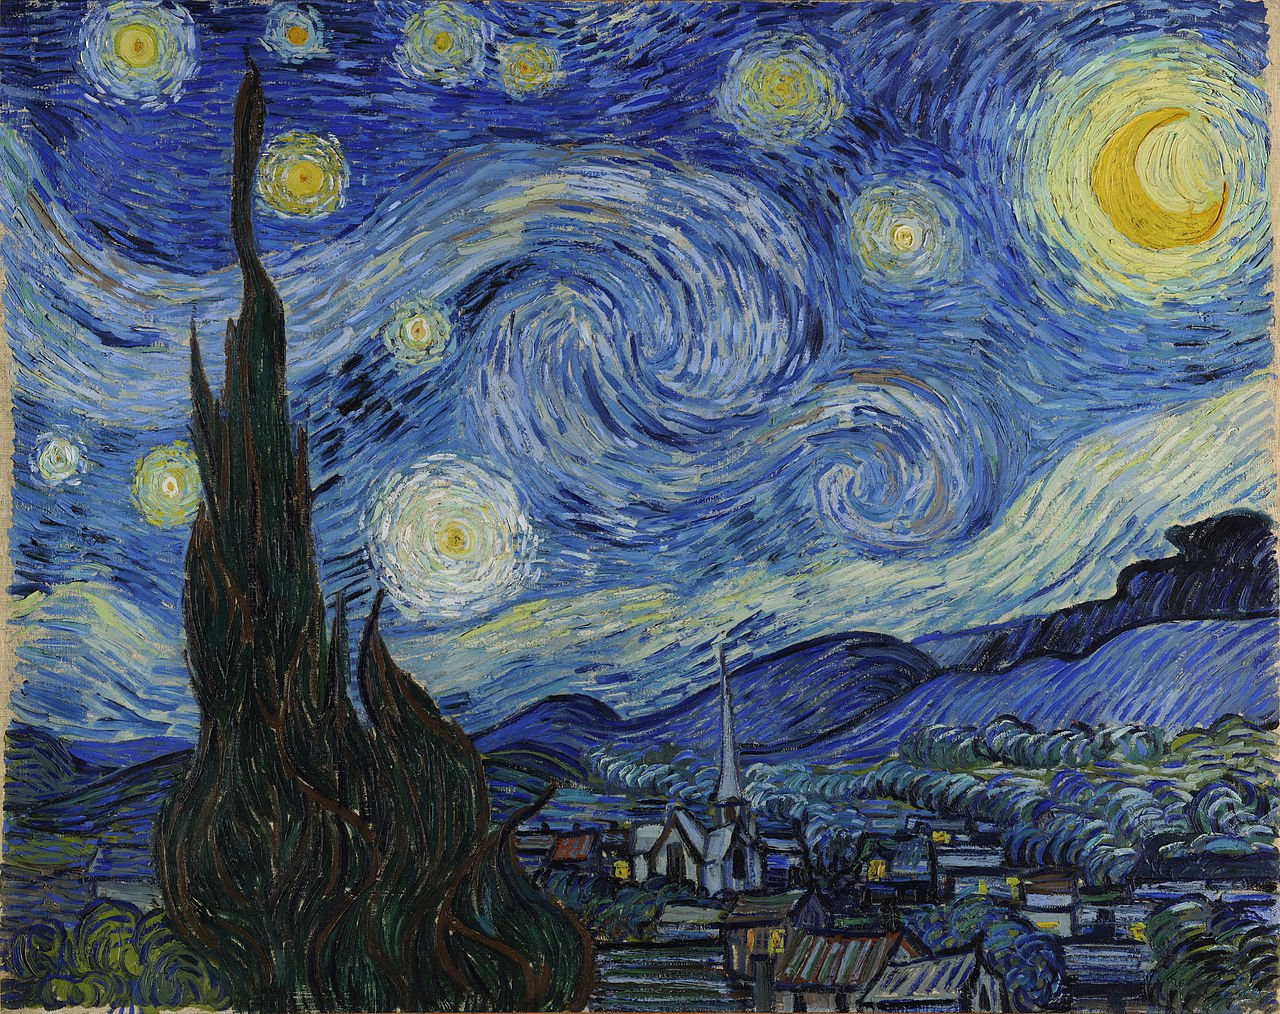 Vincent Van Gogh's famous artwork titled 'The Starry Night'